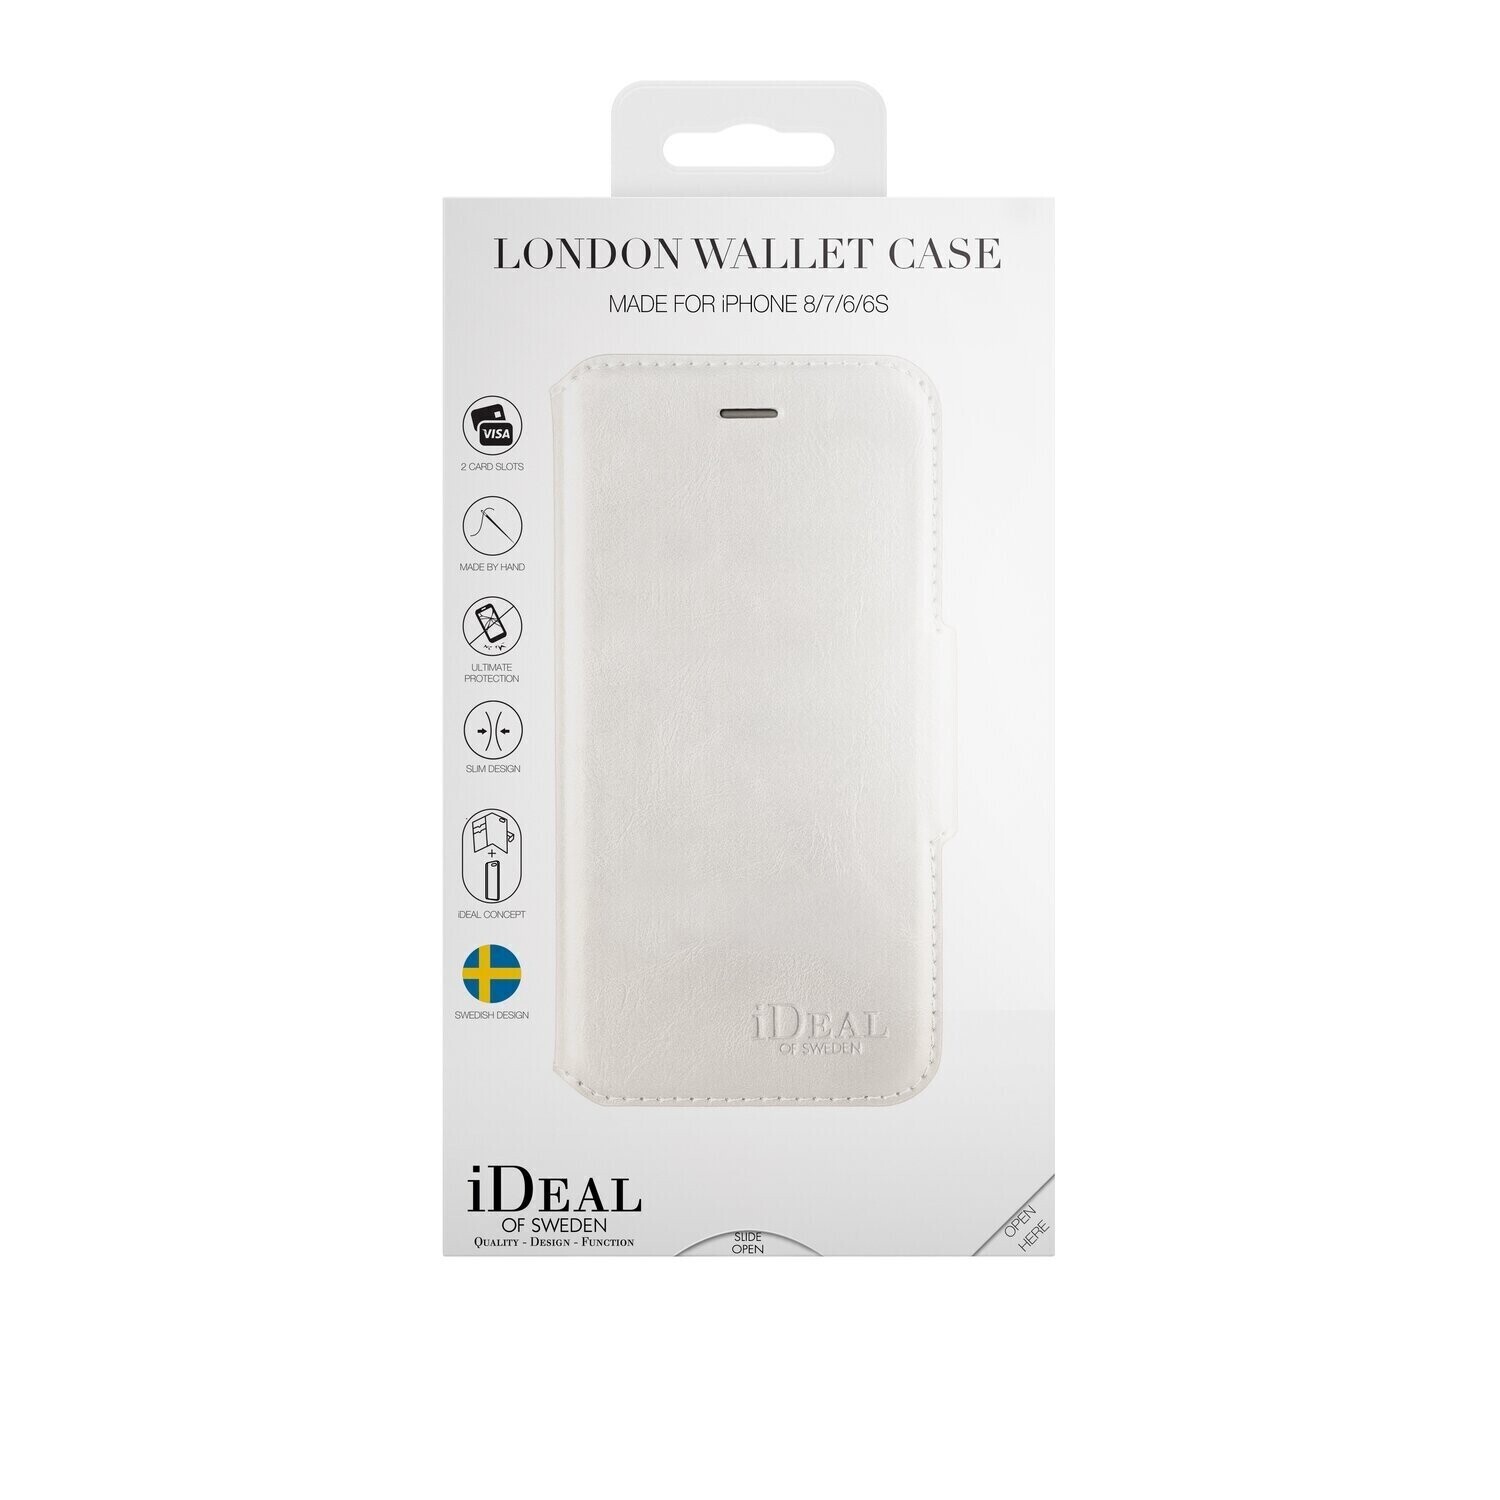 iDeal Of Sweden iPhone 7 4.7" London Wallet Case, White